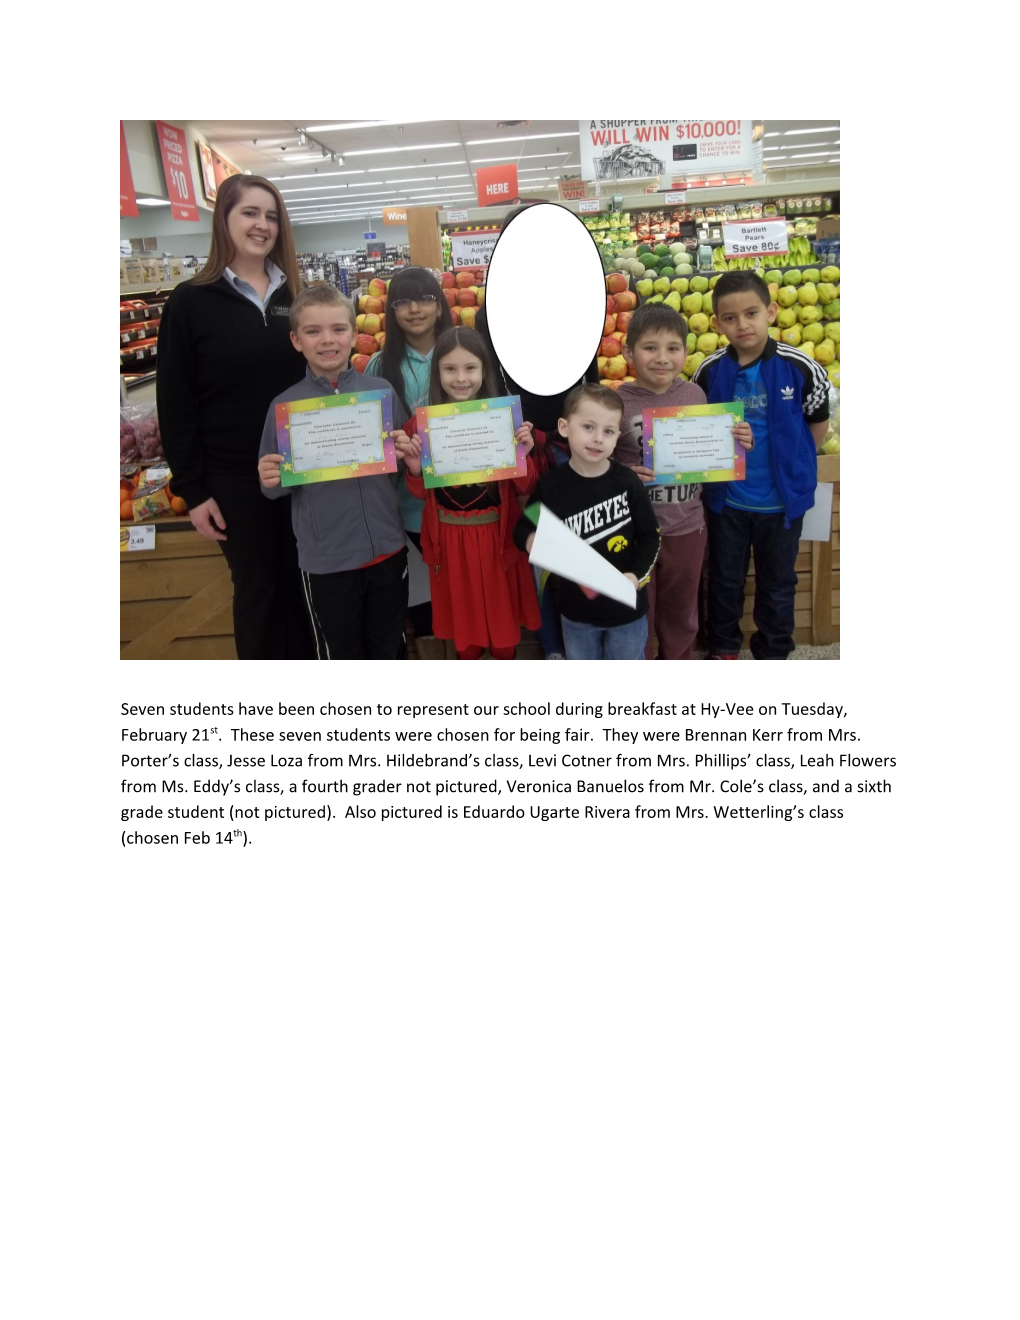 Seven Students Have Been Chosen to Represent Our School During Breakfast at Hy-Vee on Tuesday